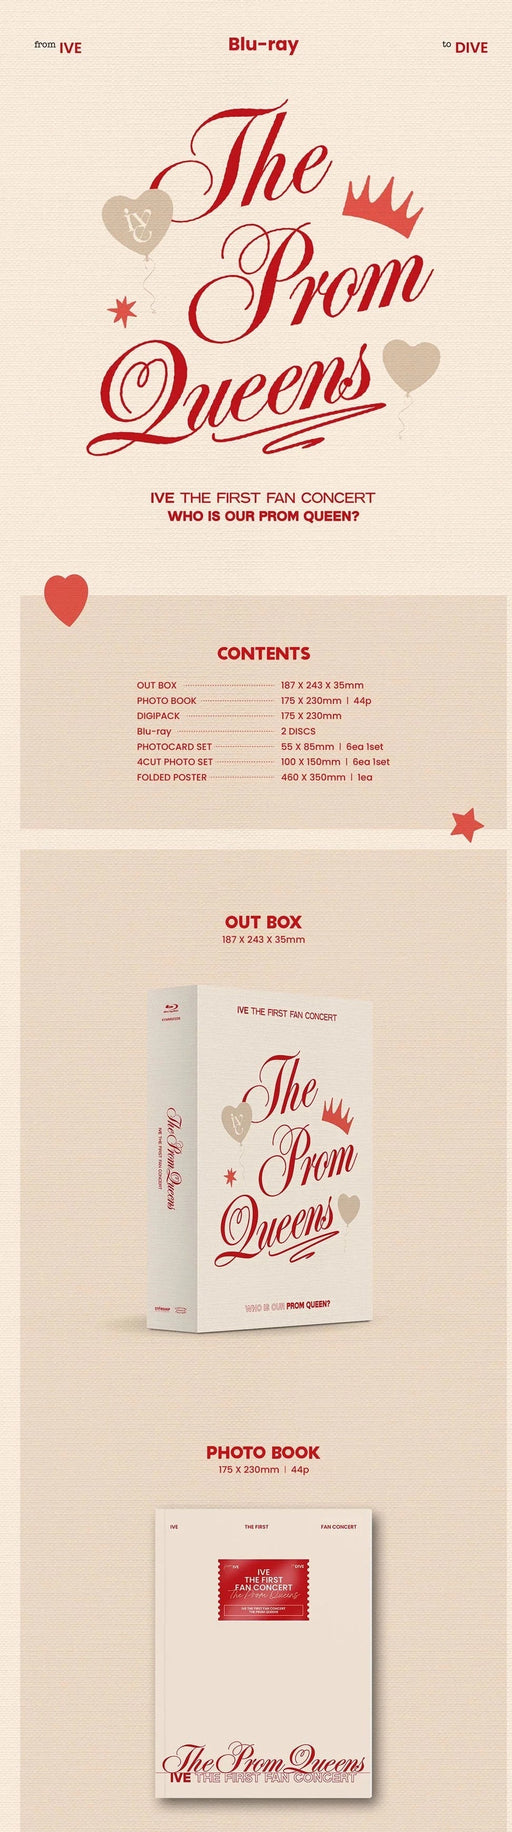 IVE - THE FIRST FAN CONCERT [The Prom Queens] Blu-ray Nolae Kpop